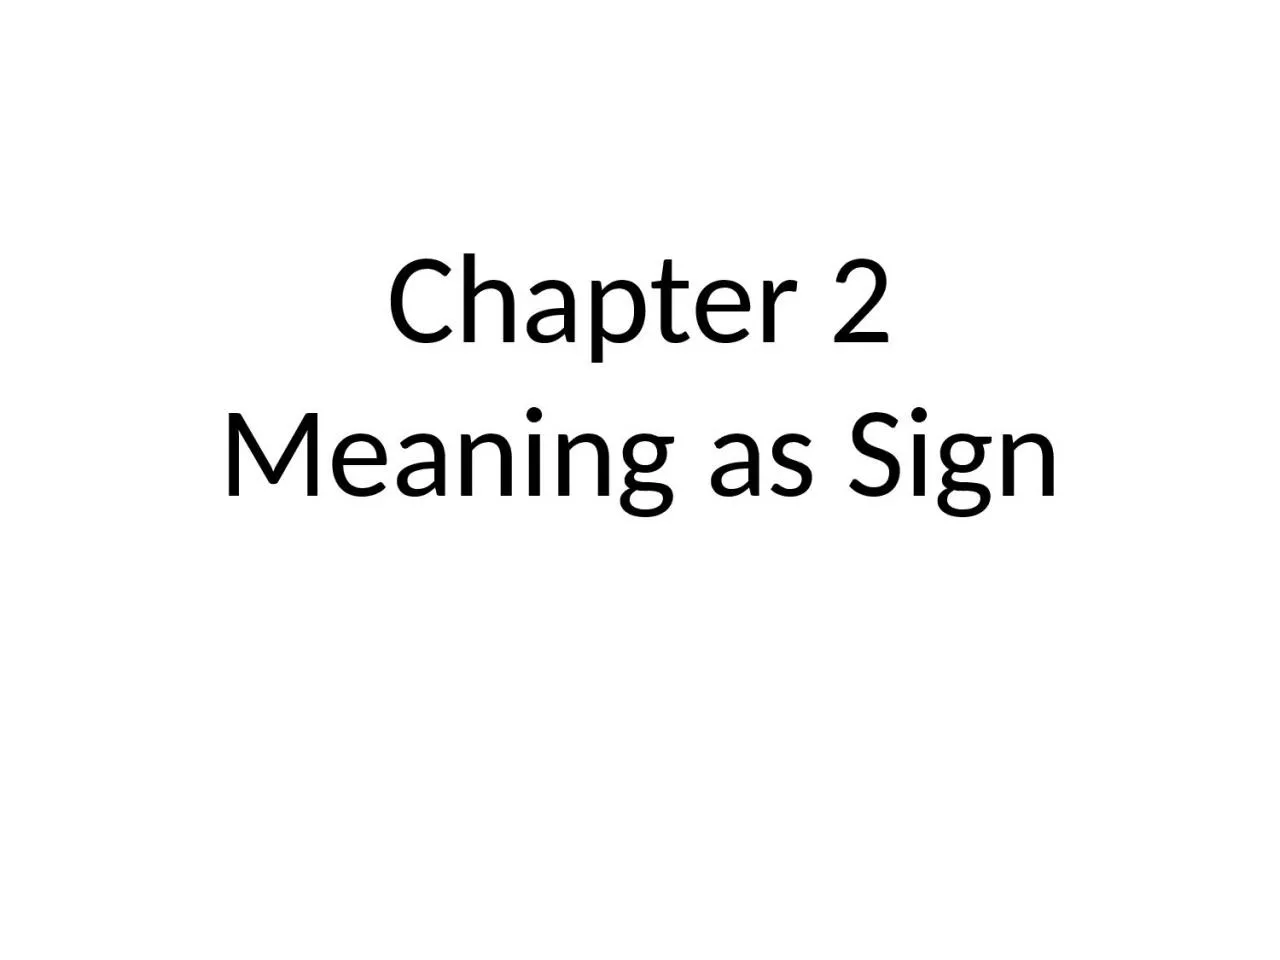 Chapter 2 Meaning as Sign